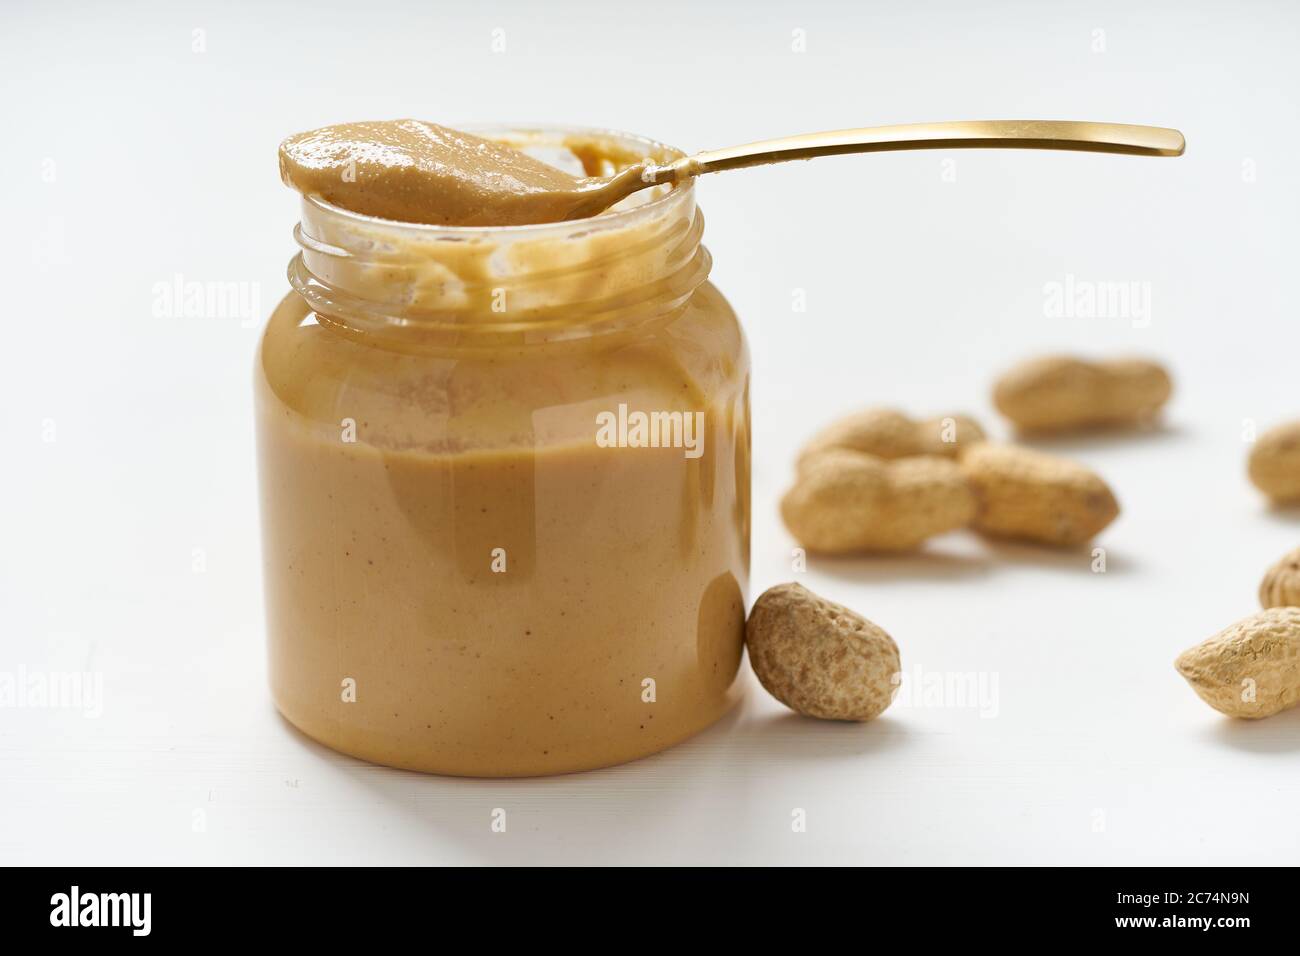 An Open Jar Of Peanut Butter With Spoon Stock Photo, Picture and Royalty  Free Image. Image 13094043.